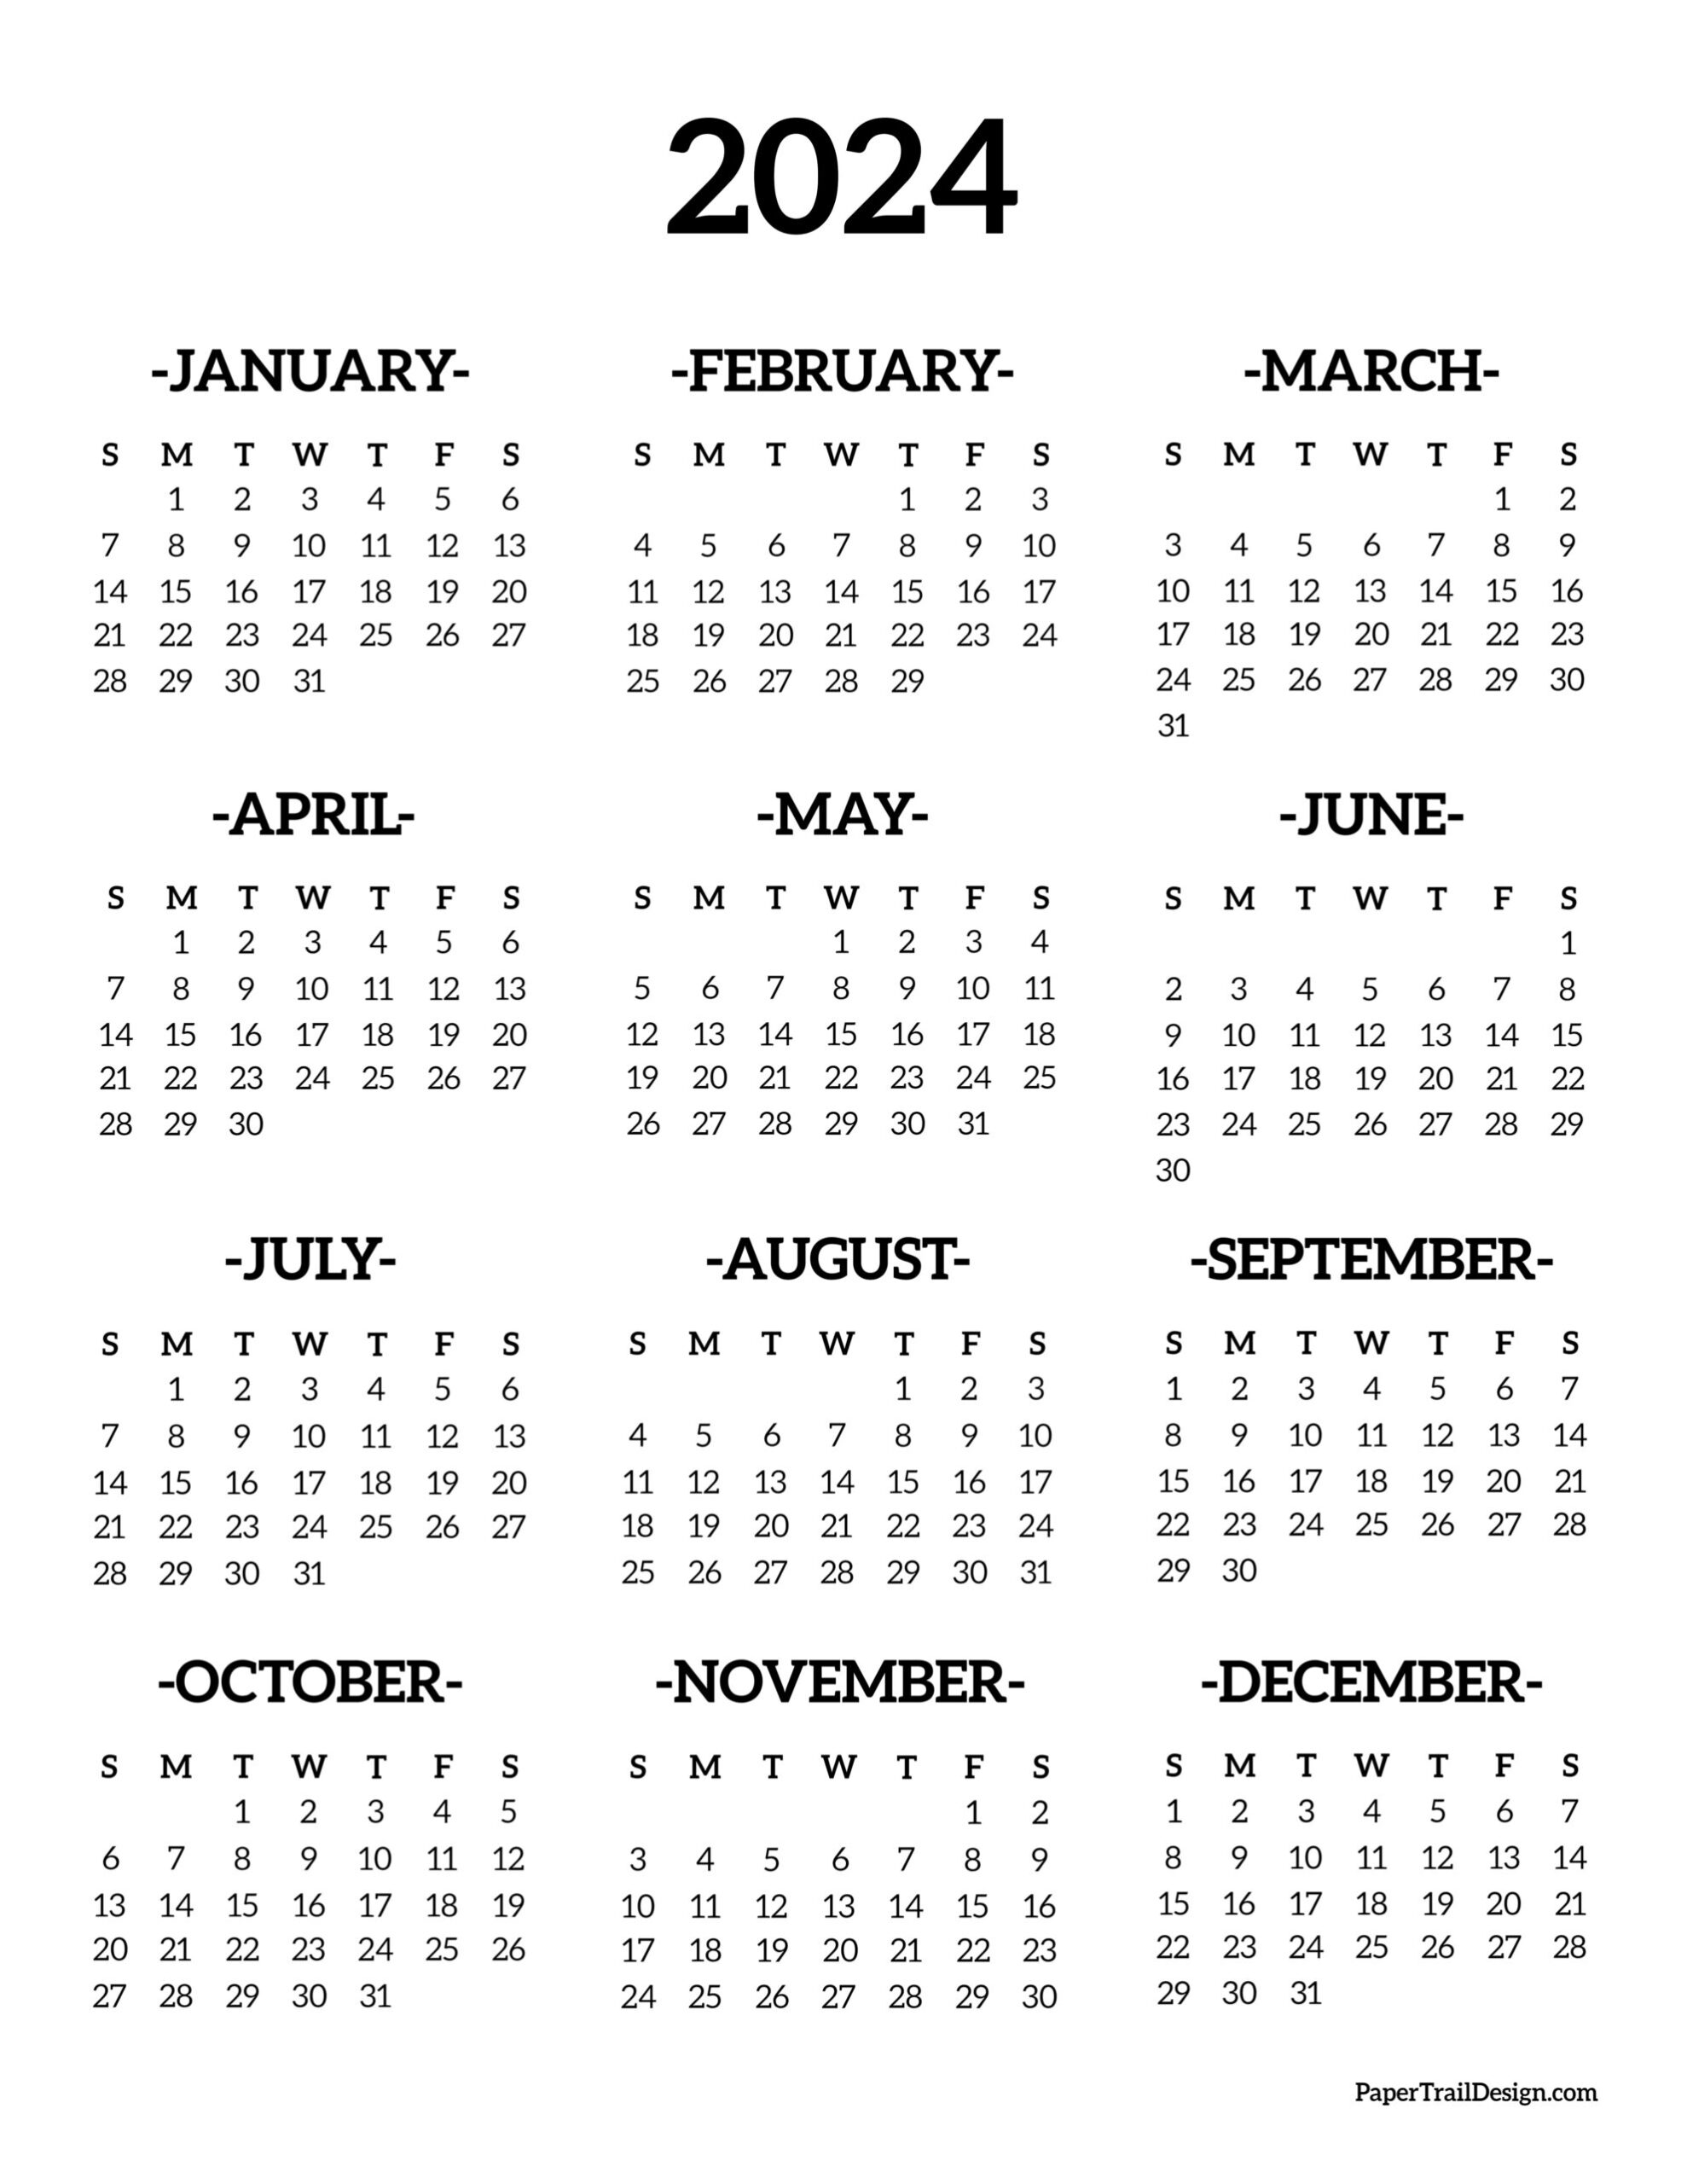 Calendar 2024 Printable One Page - Paper Trail Design for Free 2024 Printable Yearly Calendar